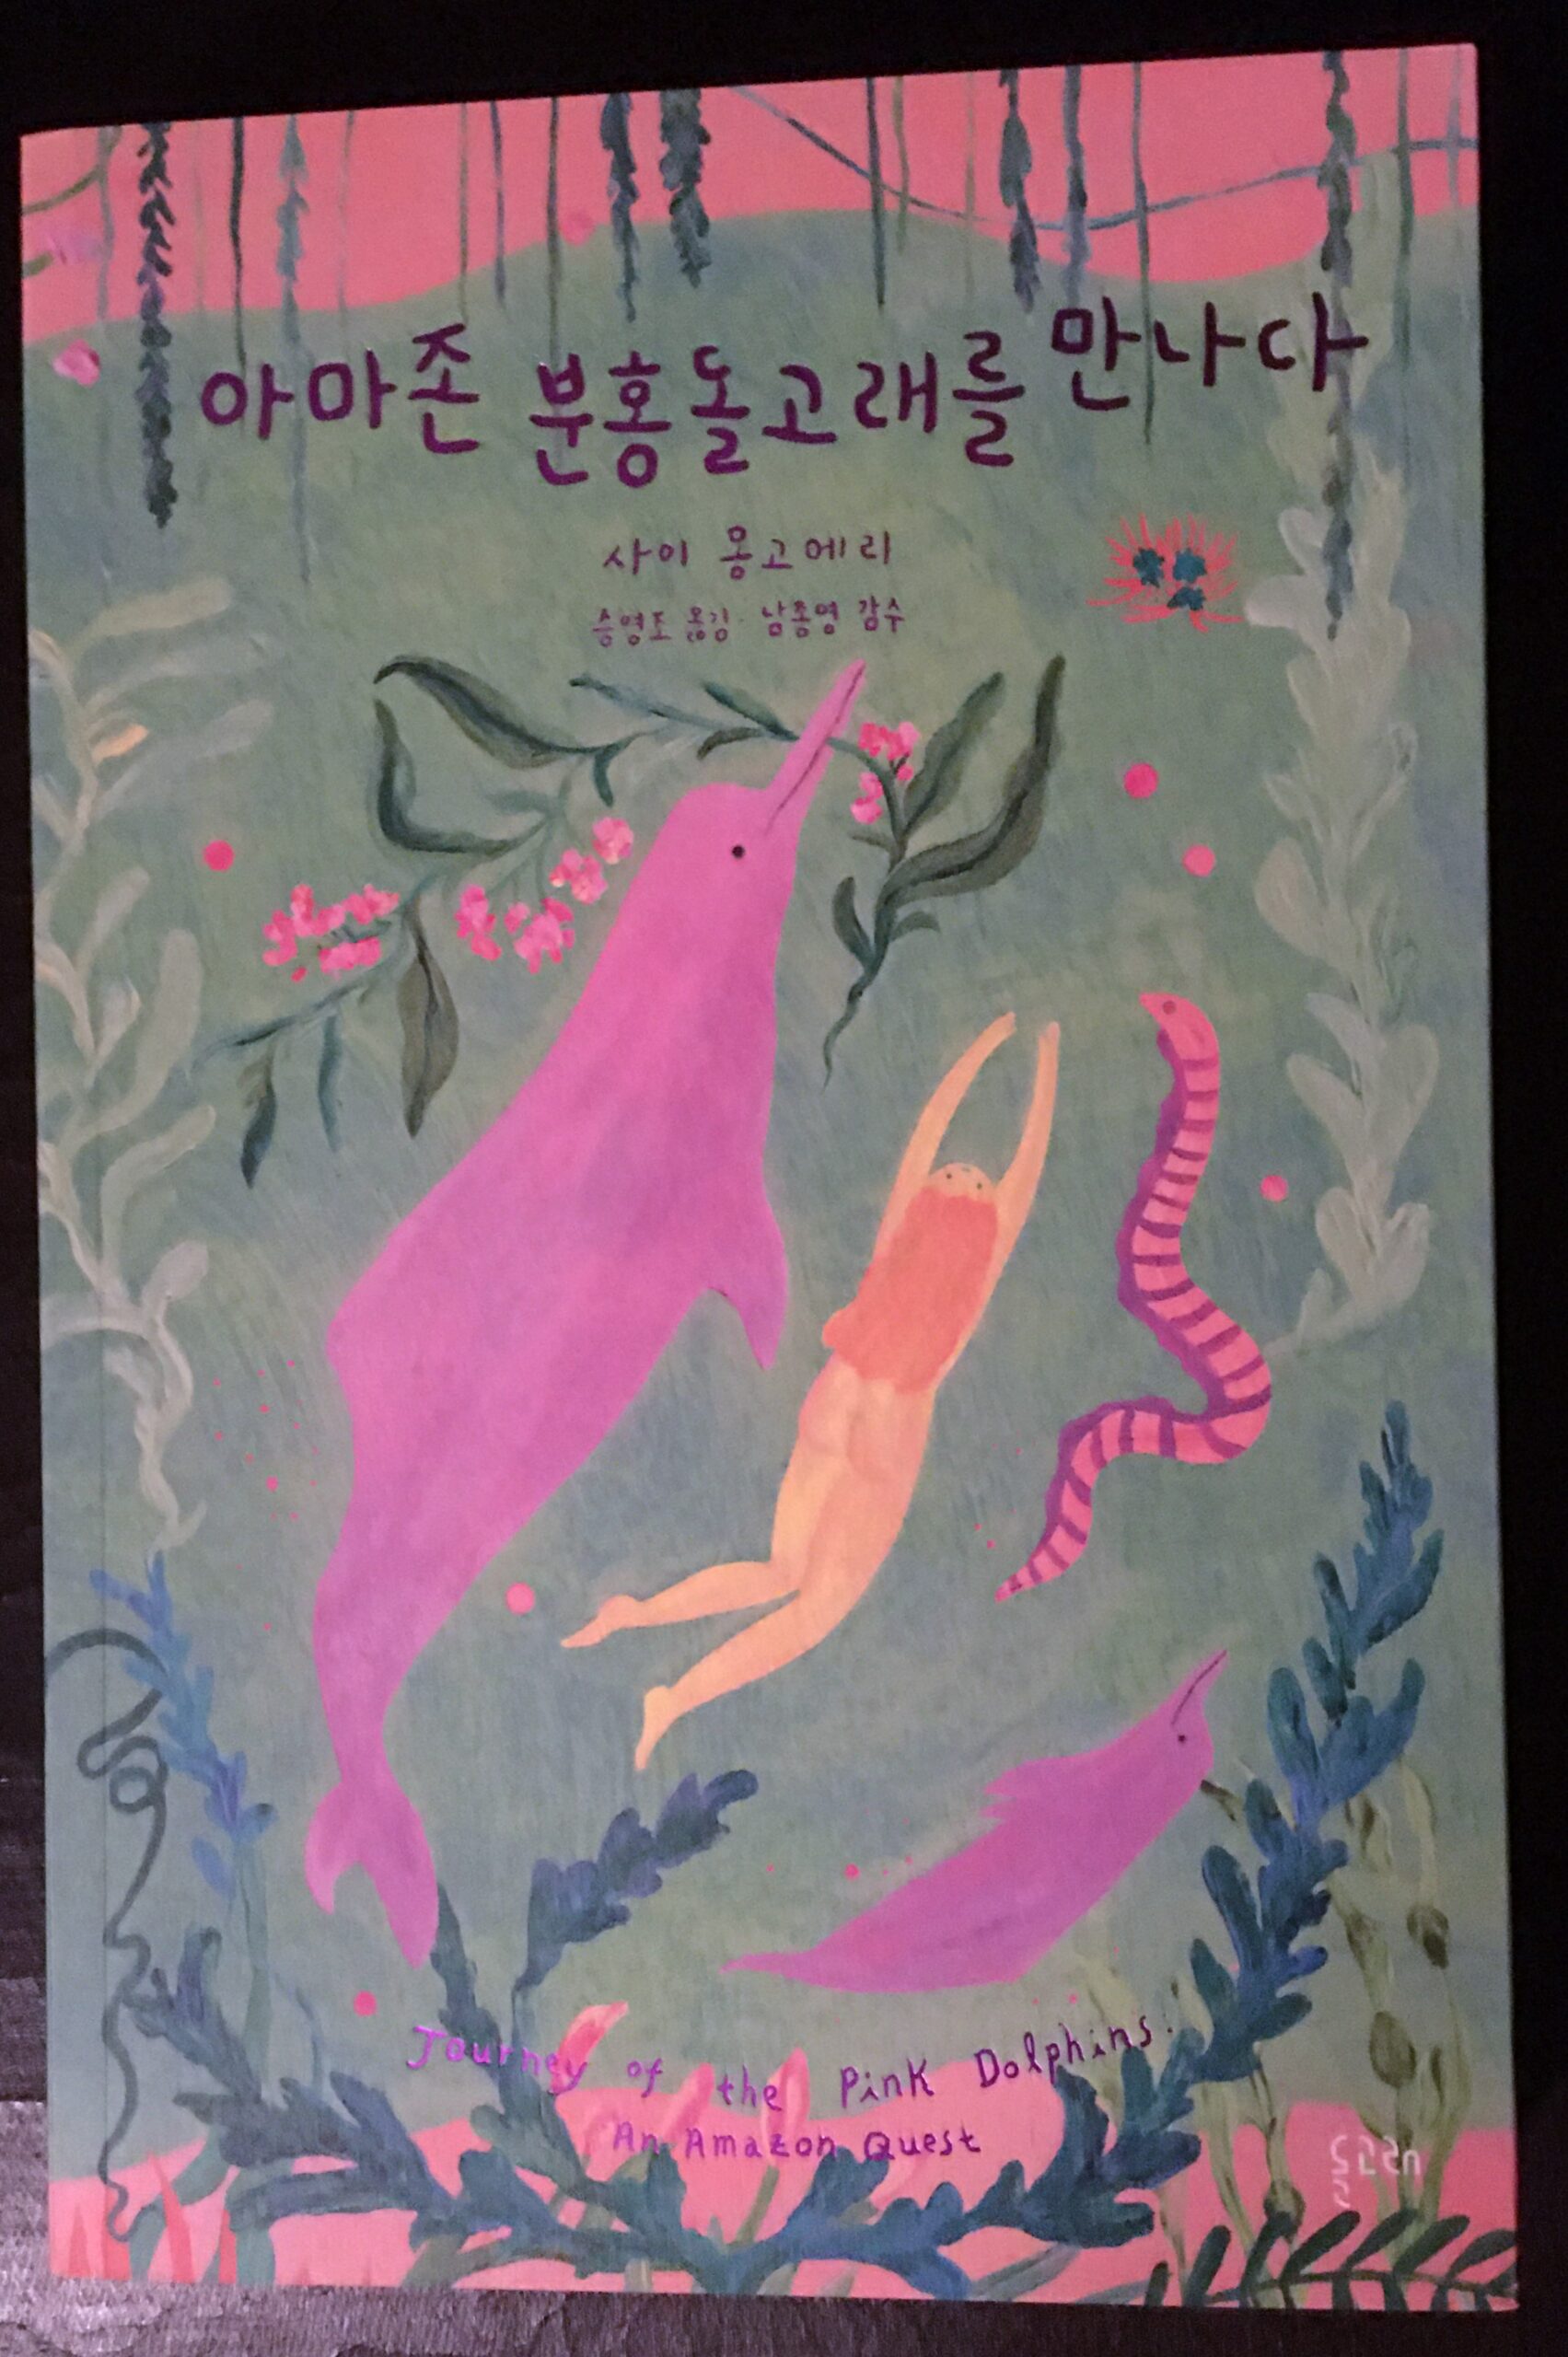 Just published: The Korean edition of The Journey of the Pink Dolphins.